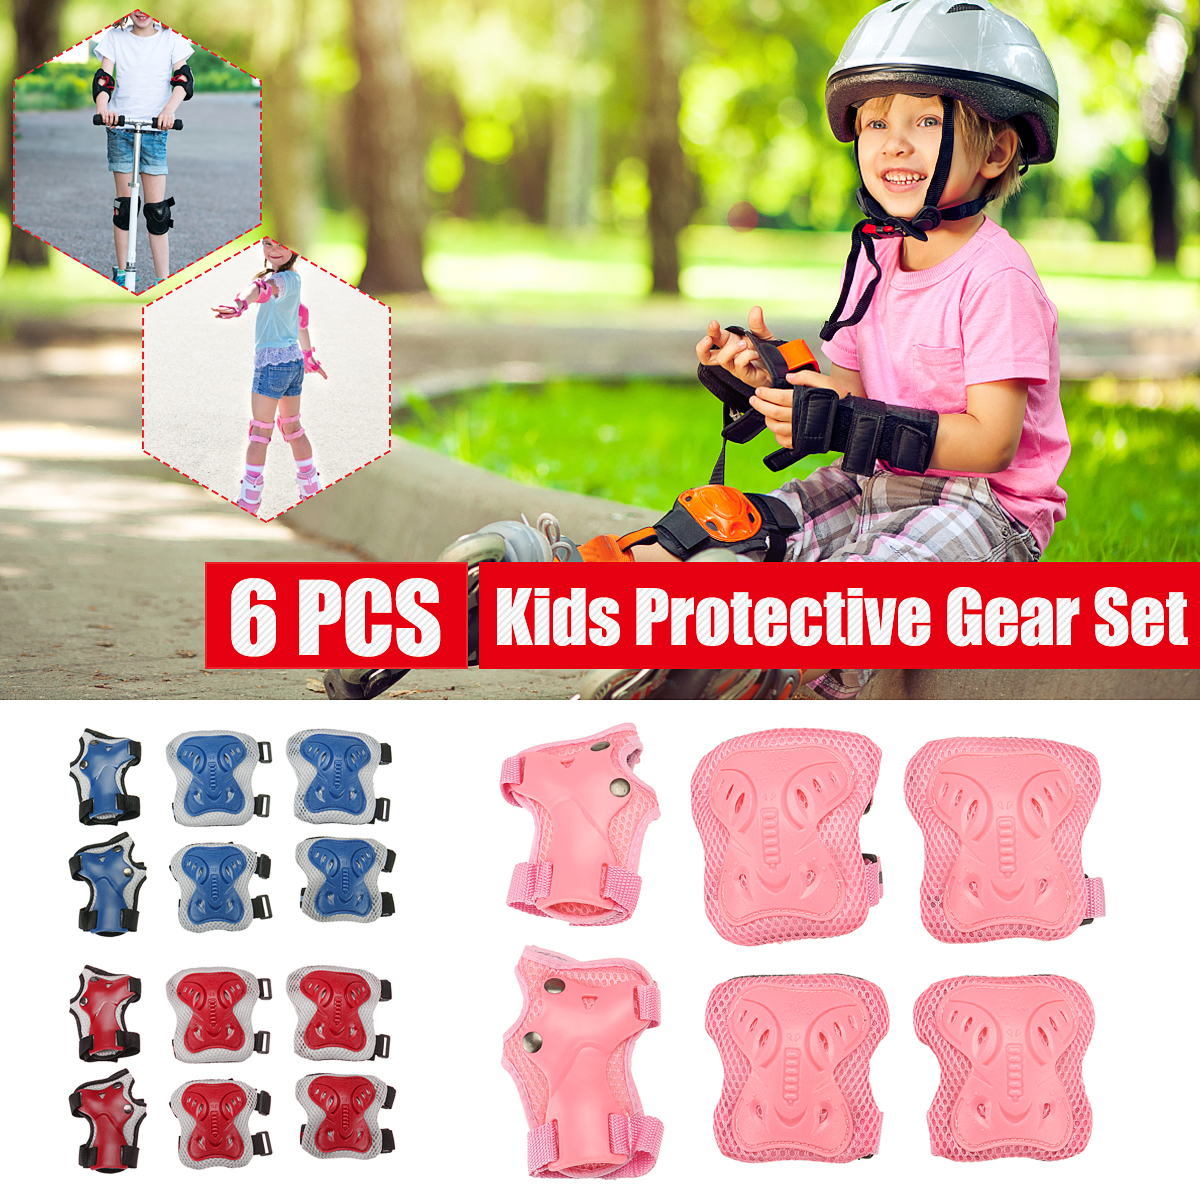 6PCS-Set-Adult-Children-KneeElbowWrist-Pads-Protective-Gears-for-Skateboard-Bicycle-Ice-Inline-Rolle-1796809-1